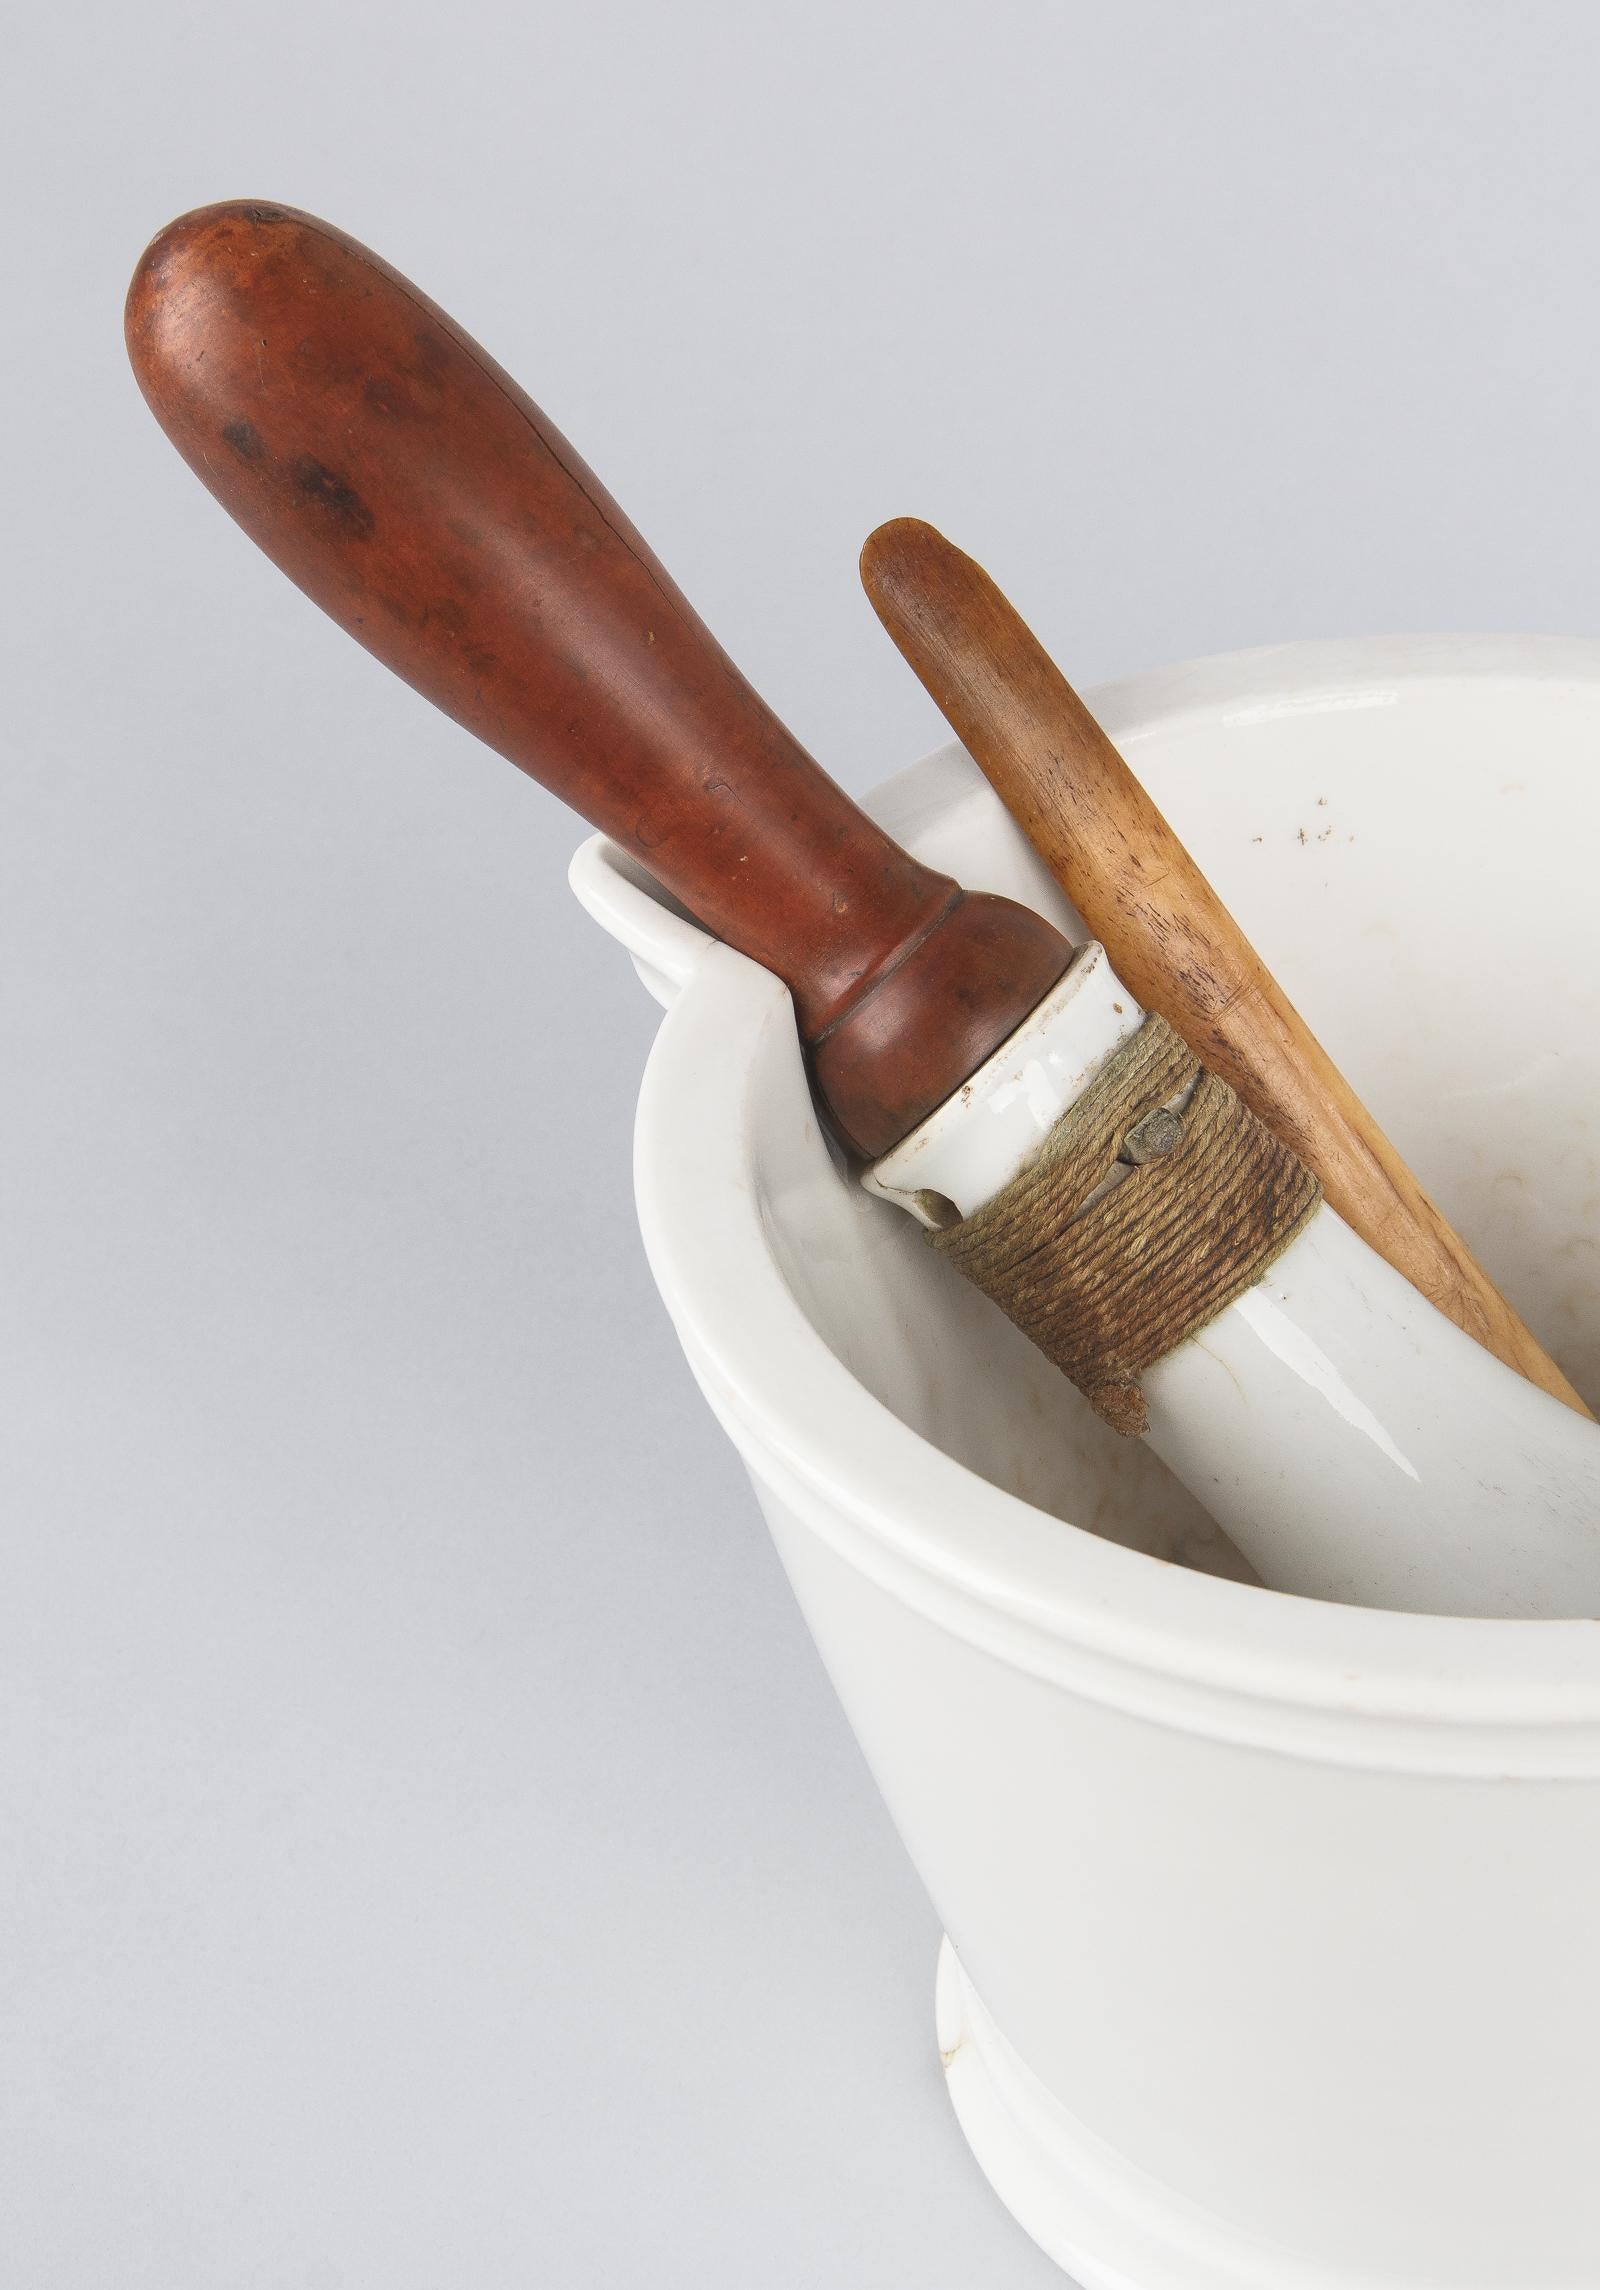 19th Century French Apothecary Ceramic Mortar with Pestle, Late 1800s